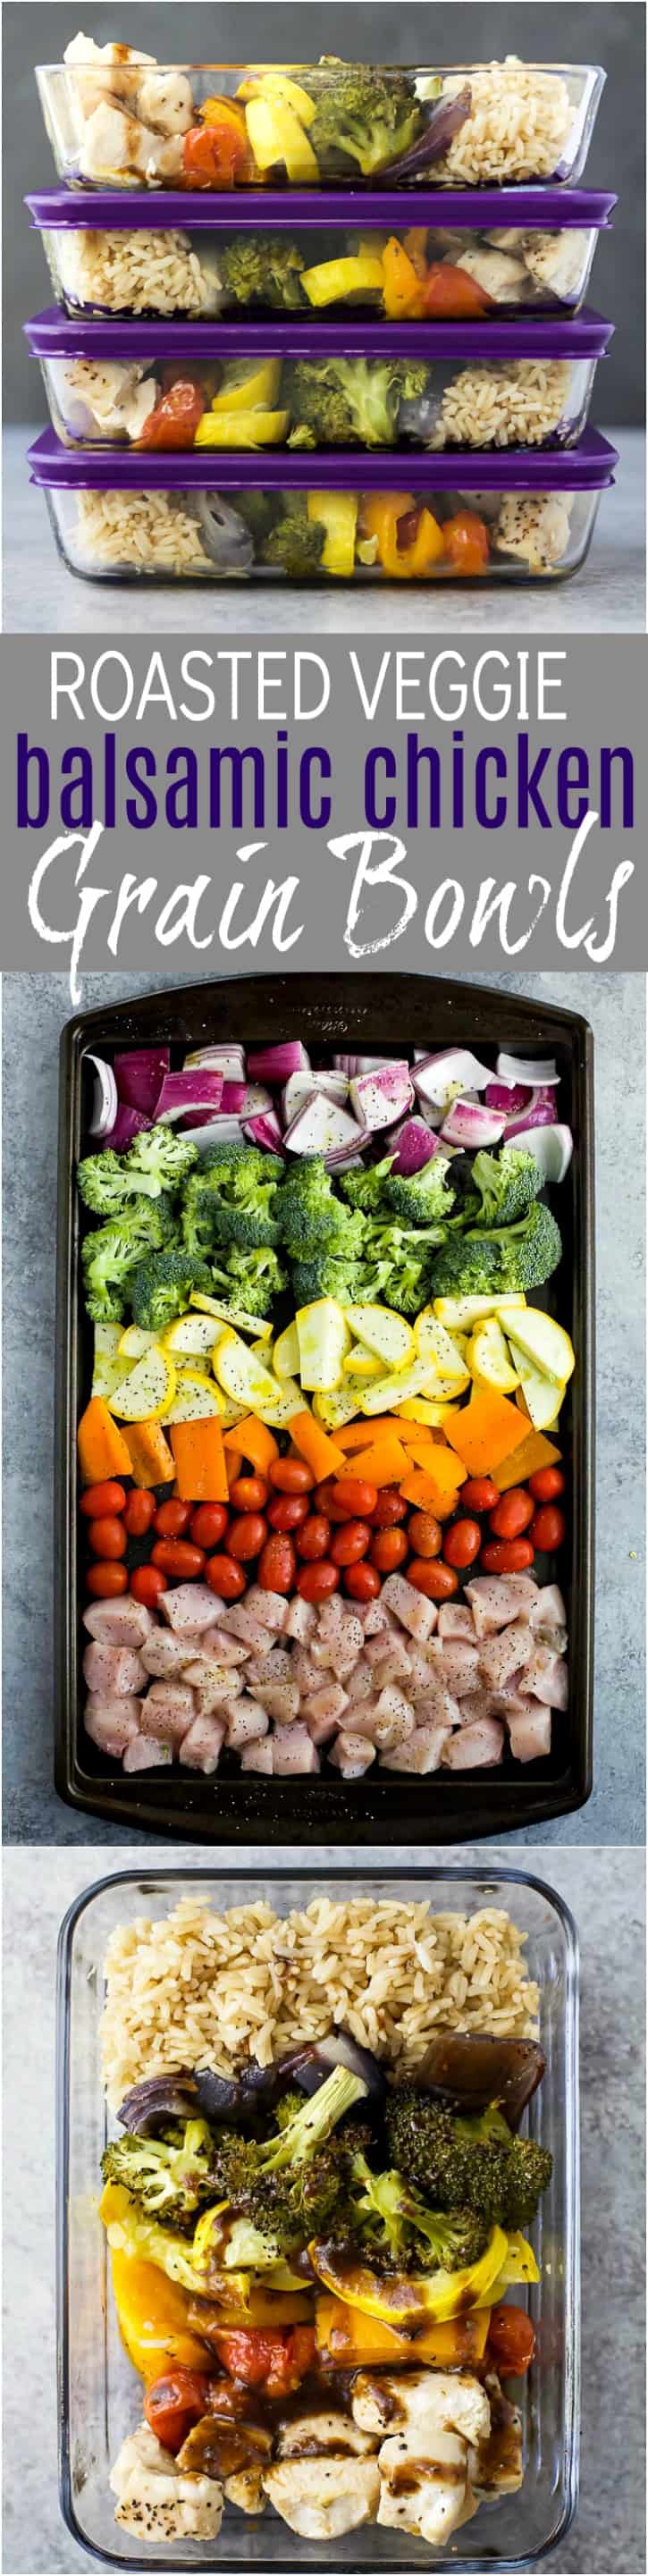 Gluten Free Roasted Veggie Balsamic Chicken Grain Bowls - an easy meal prep recipe or weeknight dinner for the week. Loads of veggies, light, flavorful, easy to make with 28 grams of protein and less than 350 calories a serving!